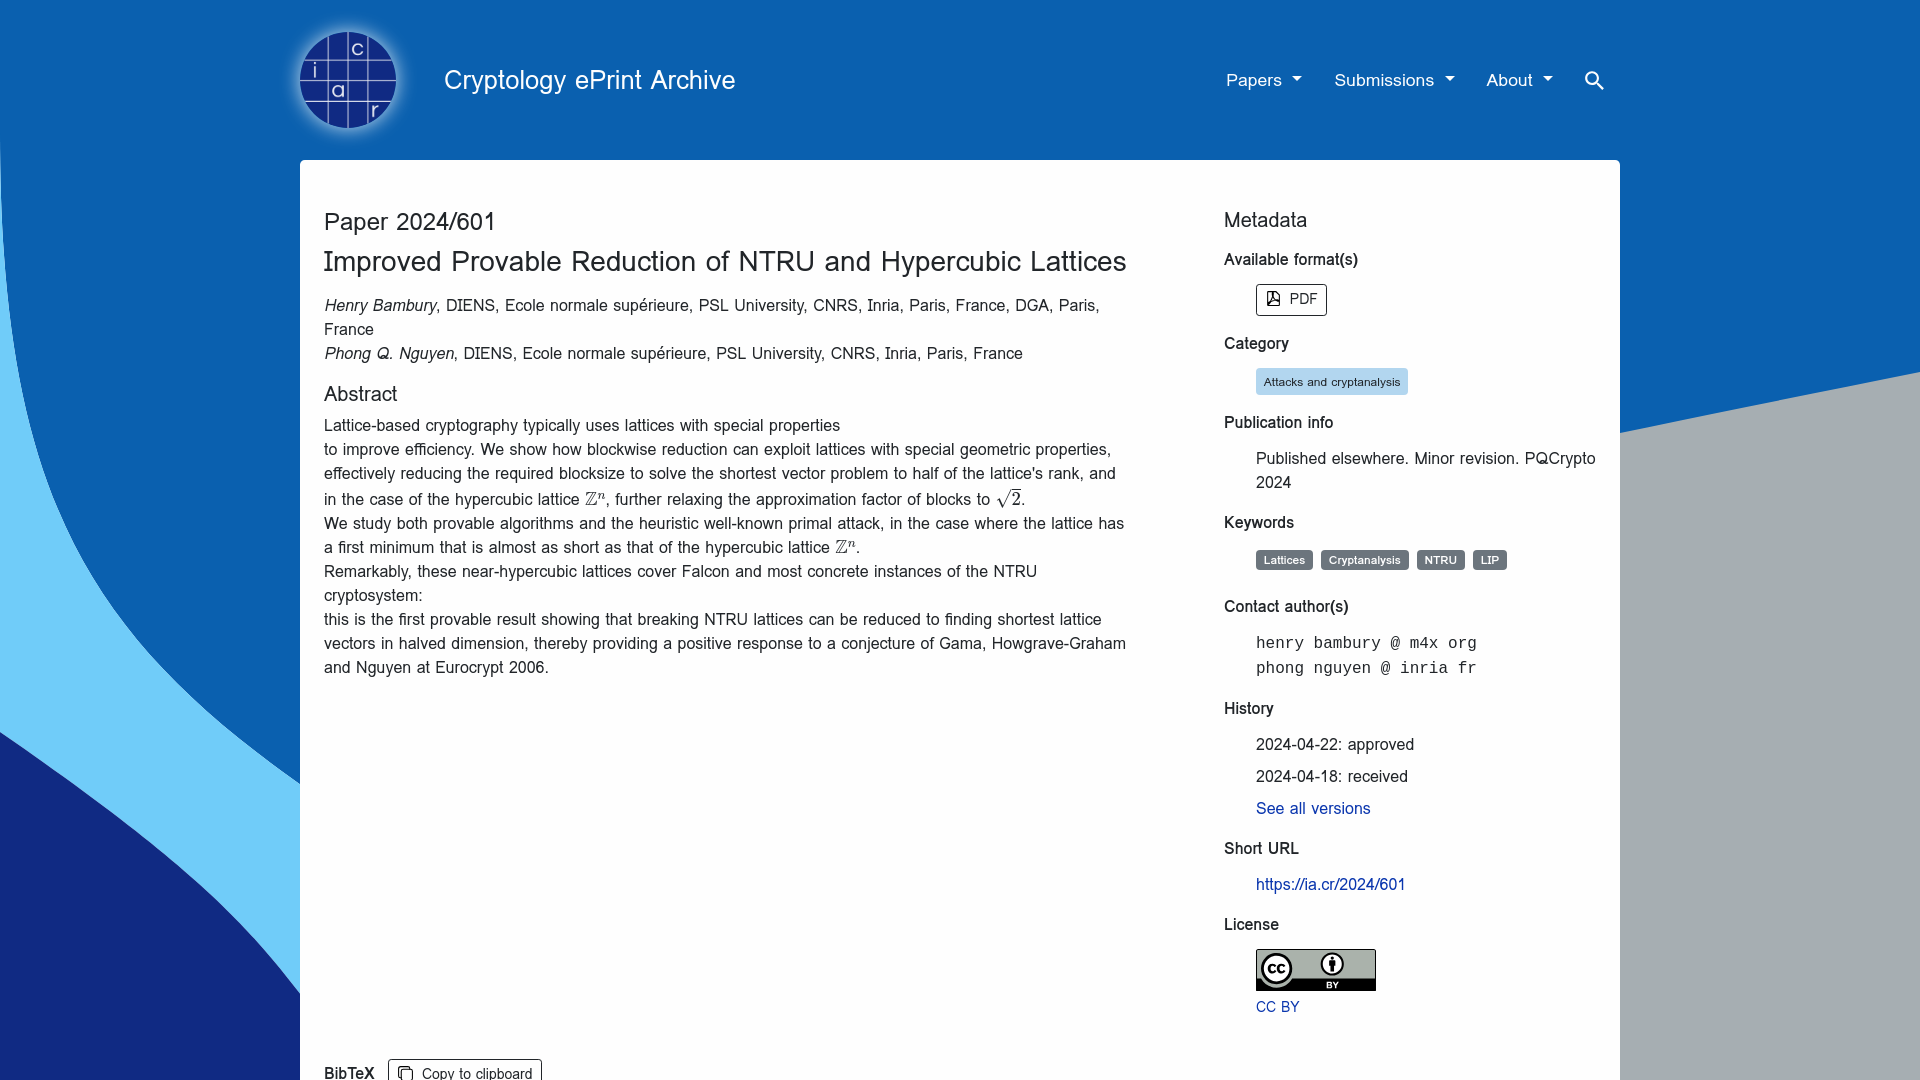 Improved Provable Reduction of NTRU and Hypercubic Lattices